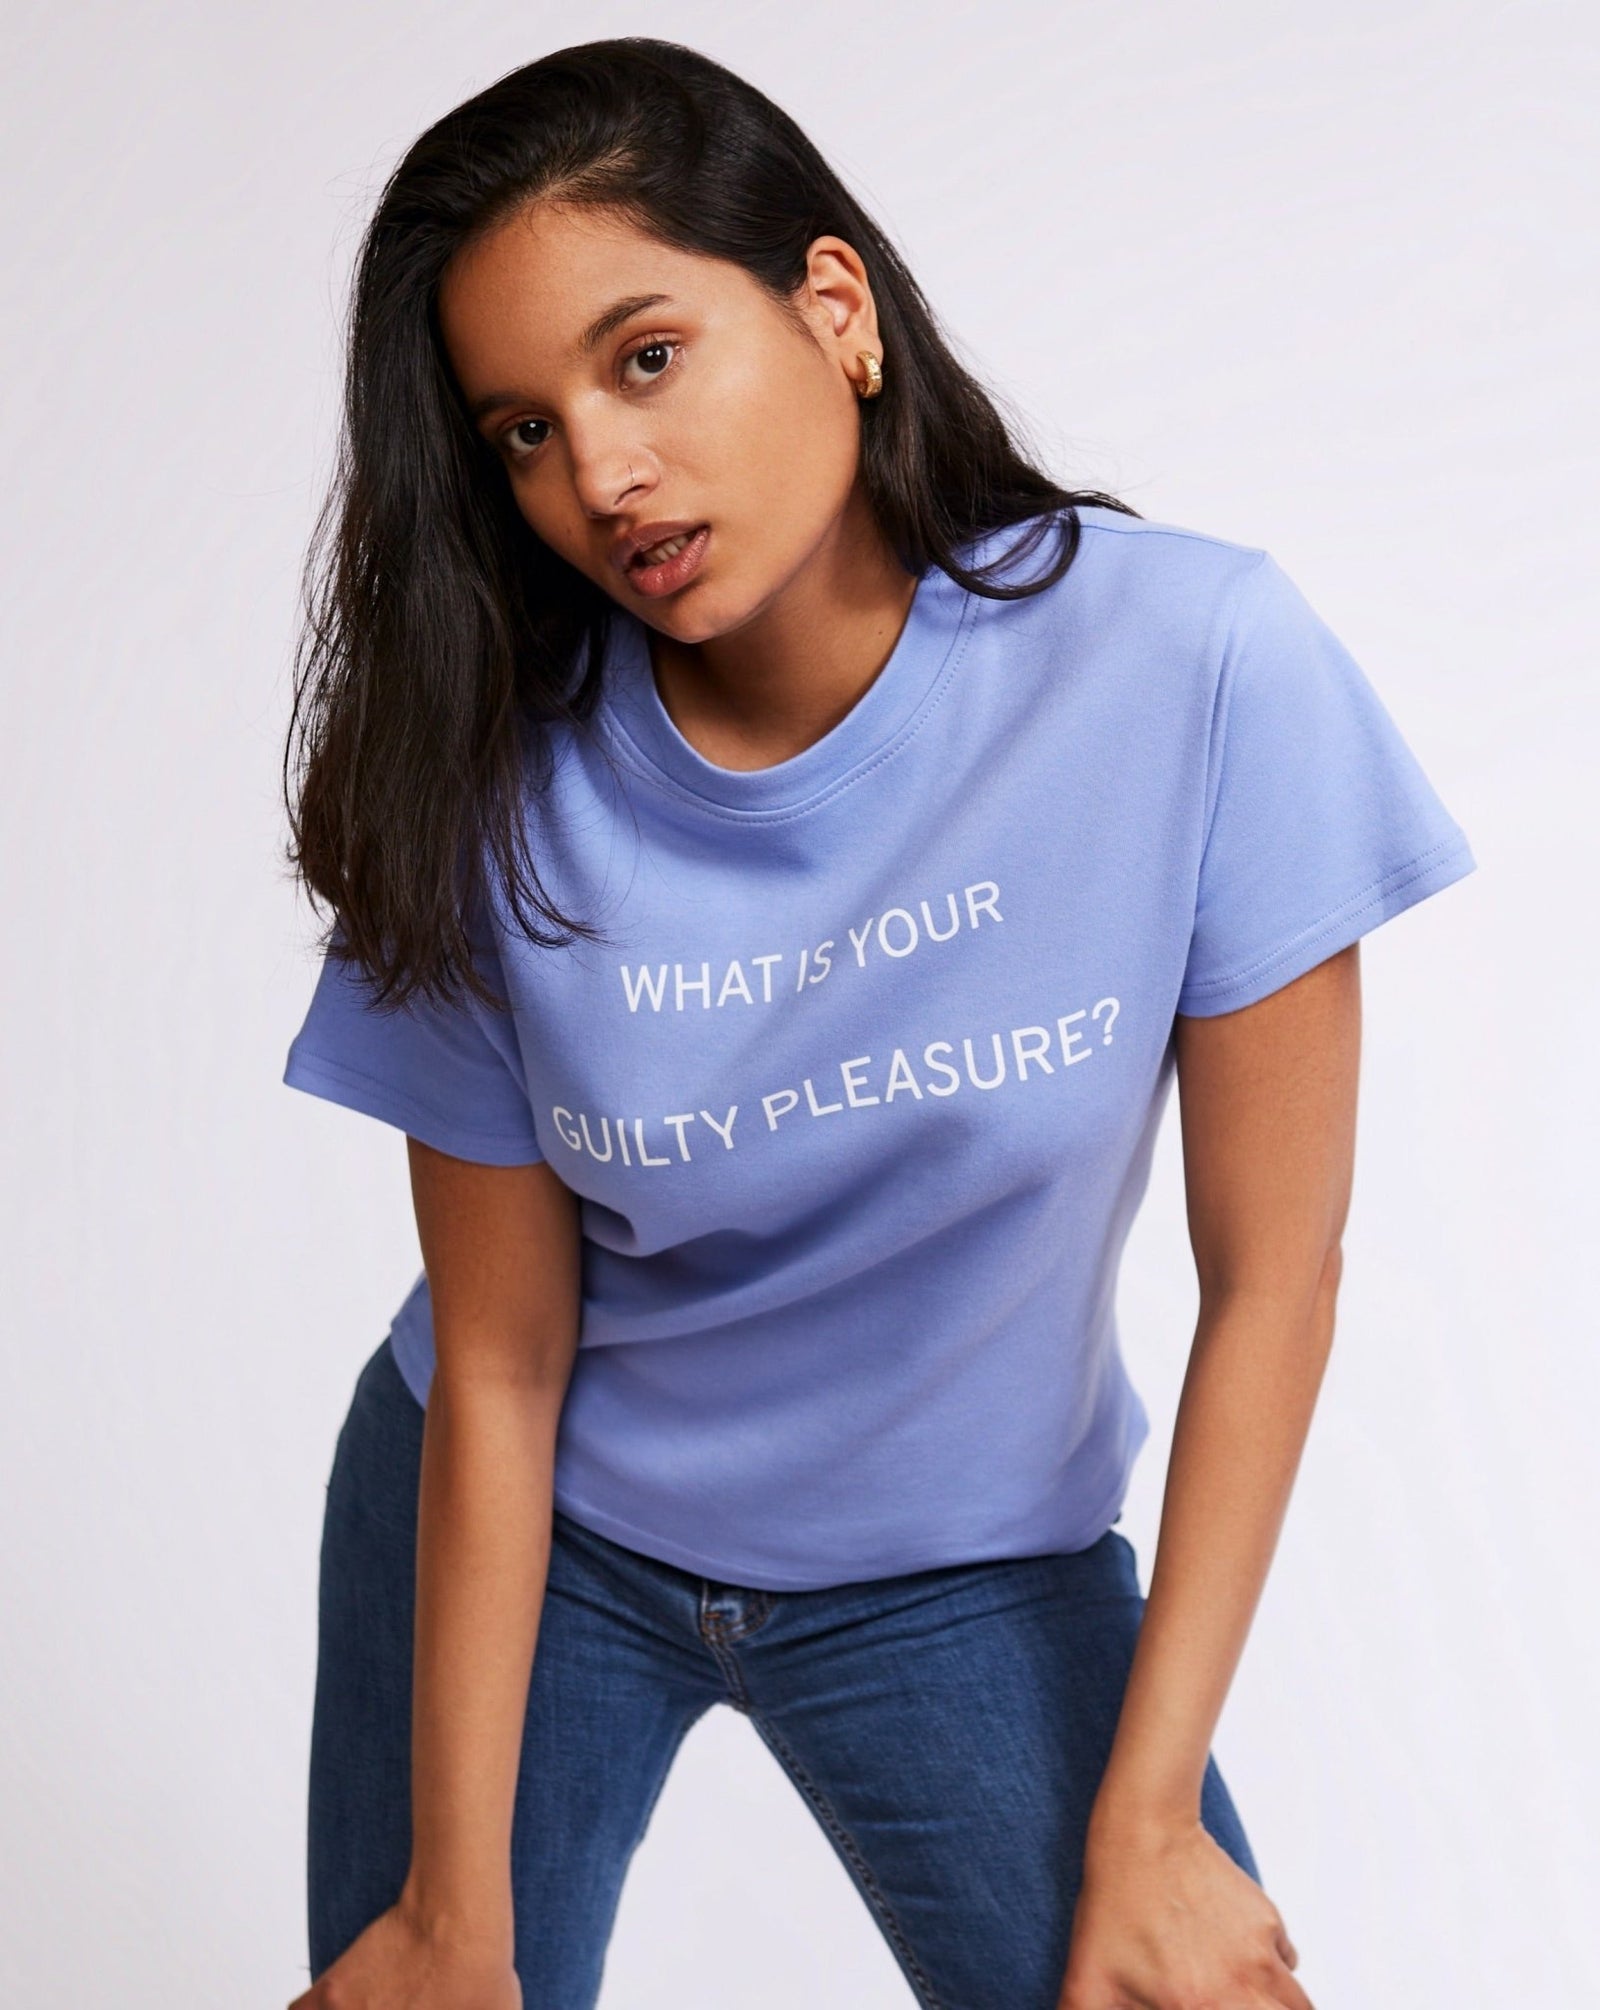 What is your guilty pleasure? Boxy T-Shirt - OBLIVIOUS?